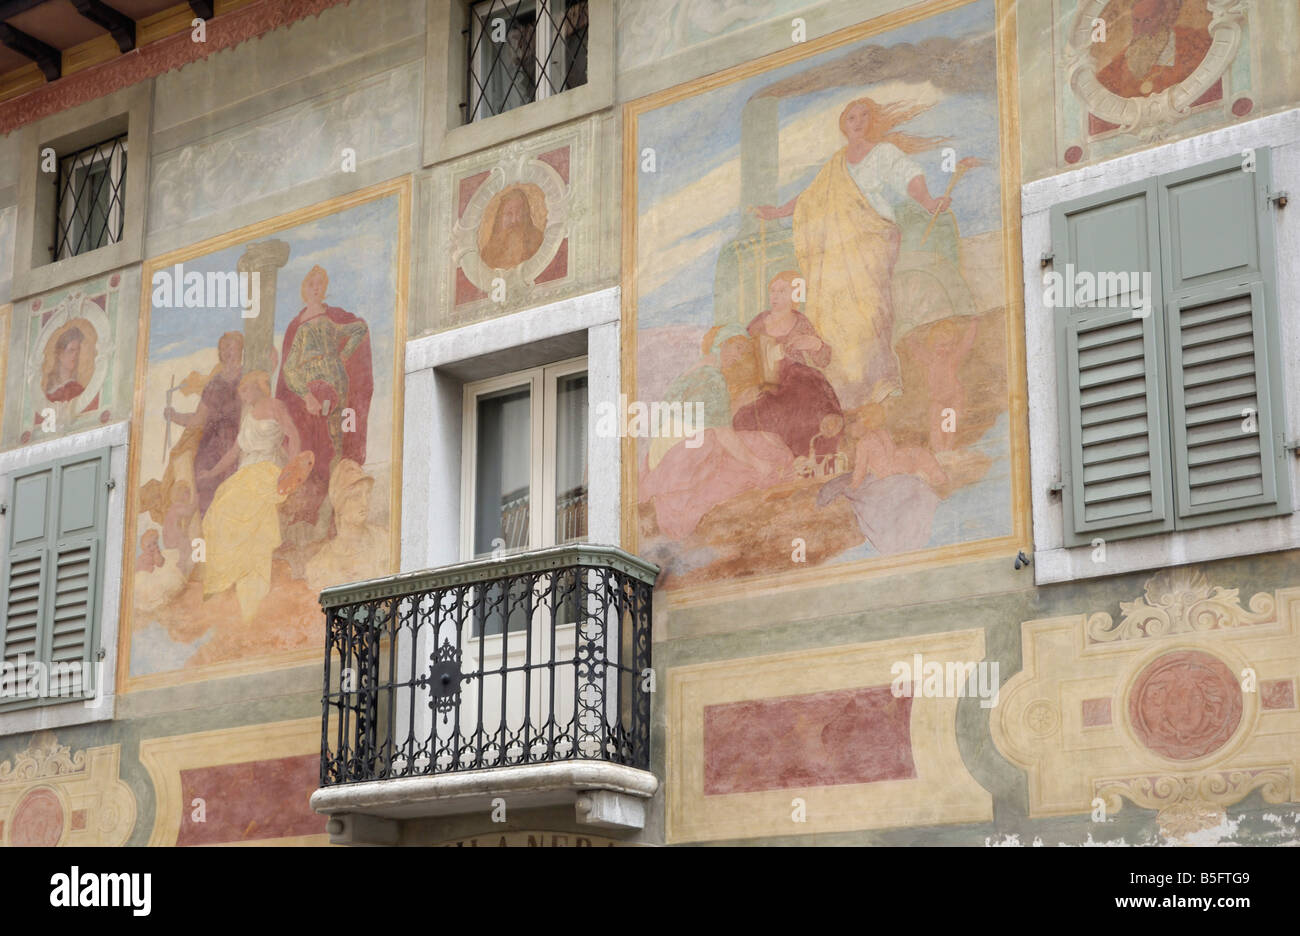 Frescoes on buildings in Cortina D'Ampezzo, Italy Stock Photo